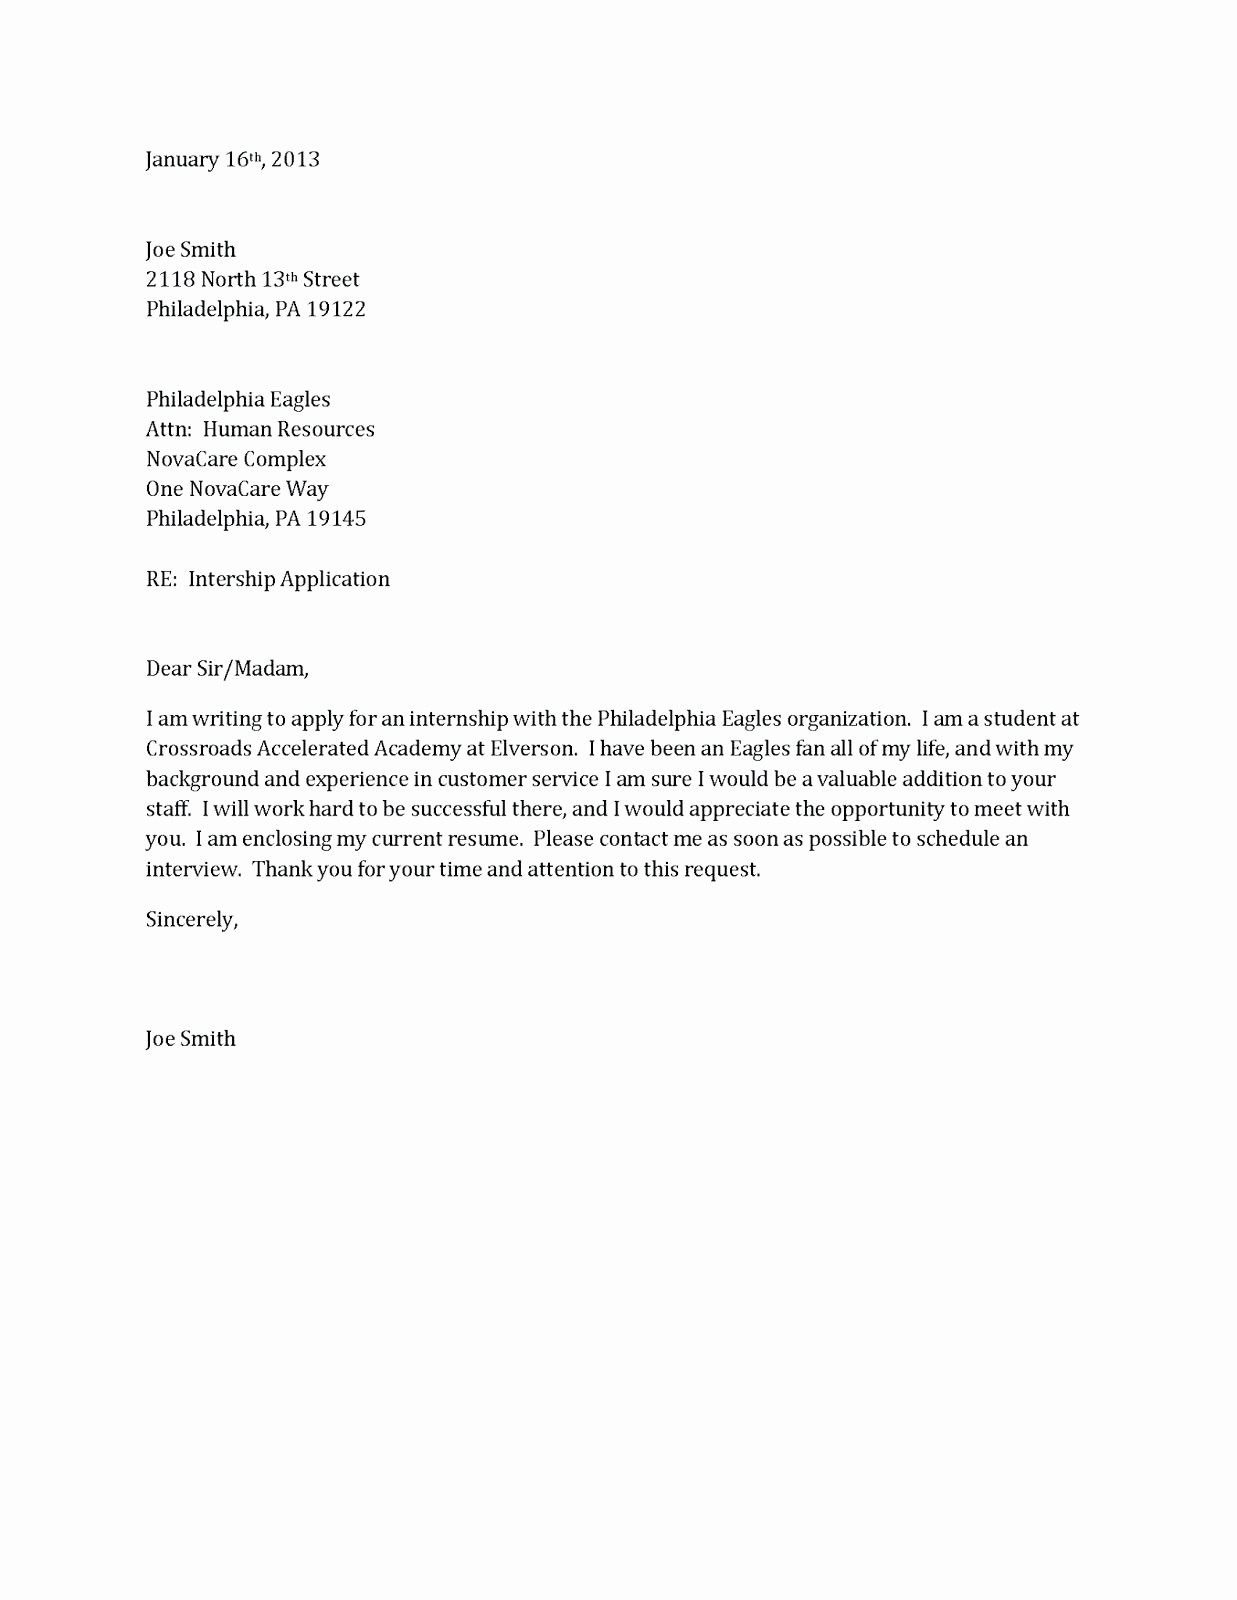 Business Letter format Template Word Lovely Template Microsoft Word Business Letter Template